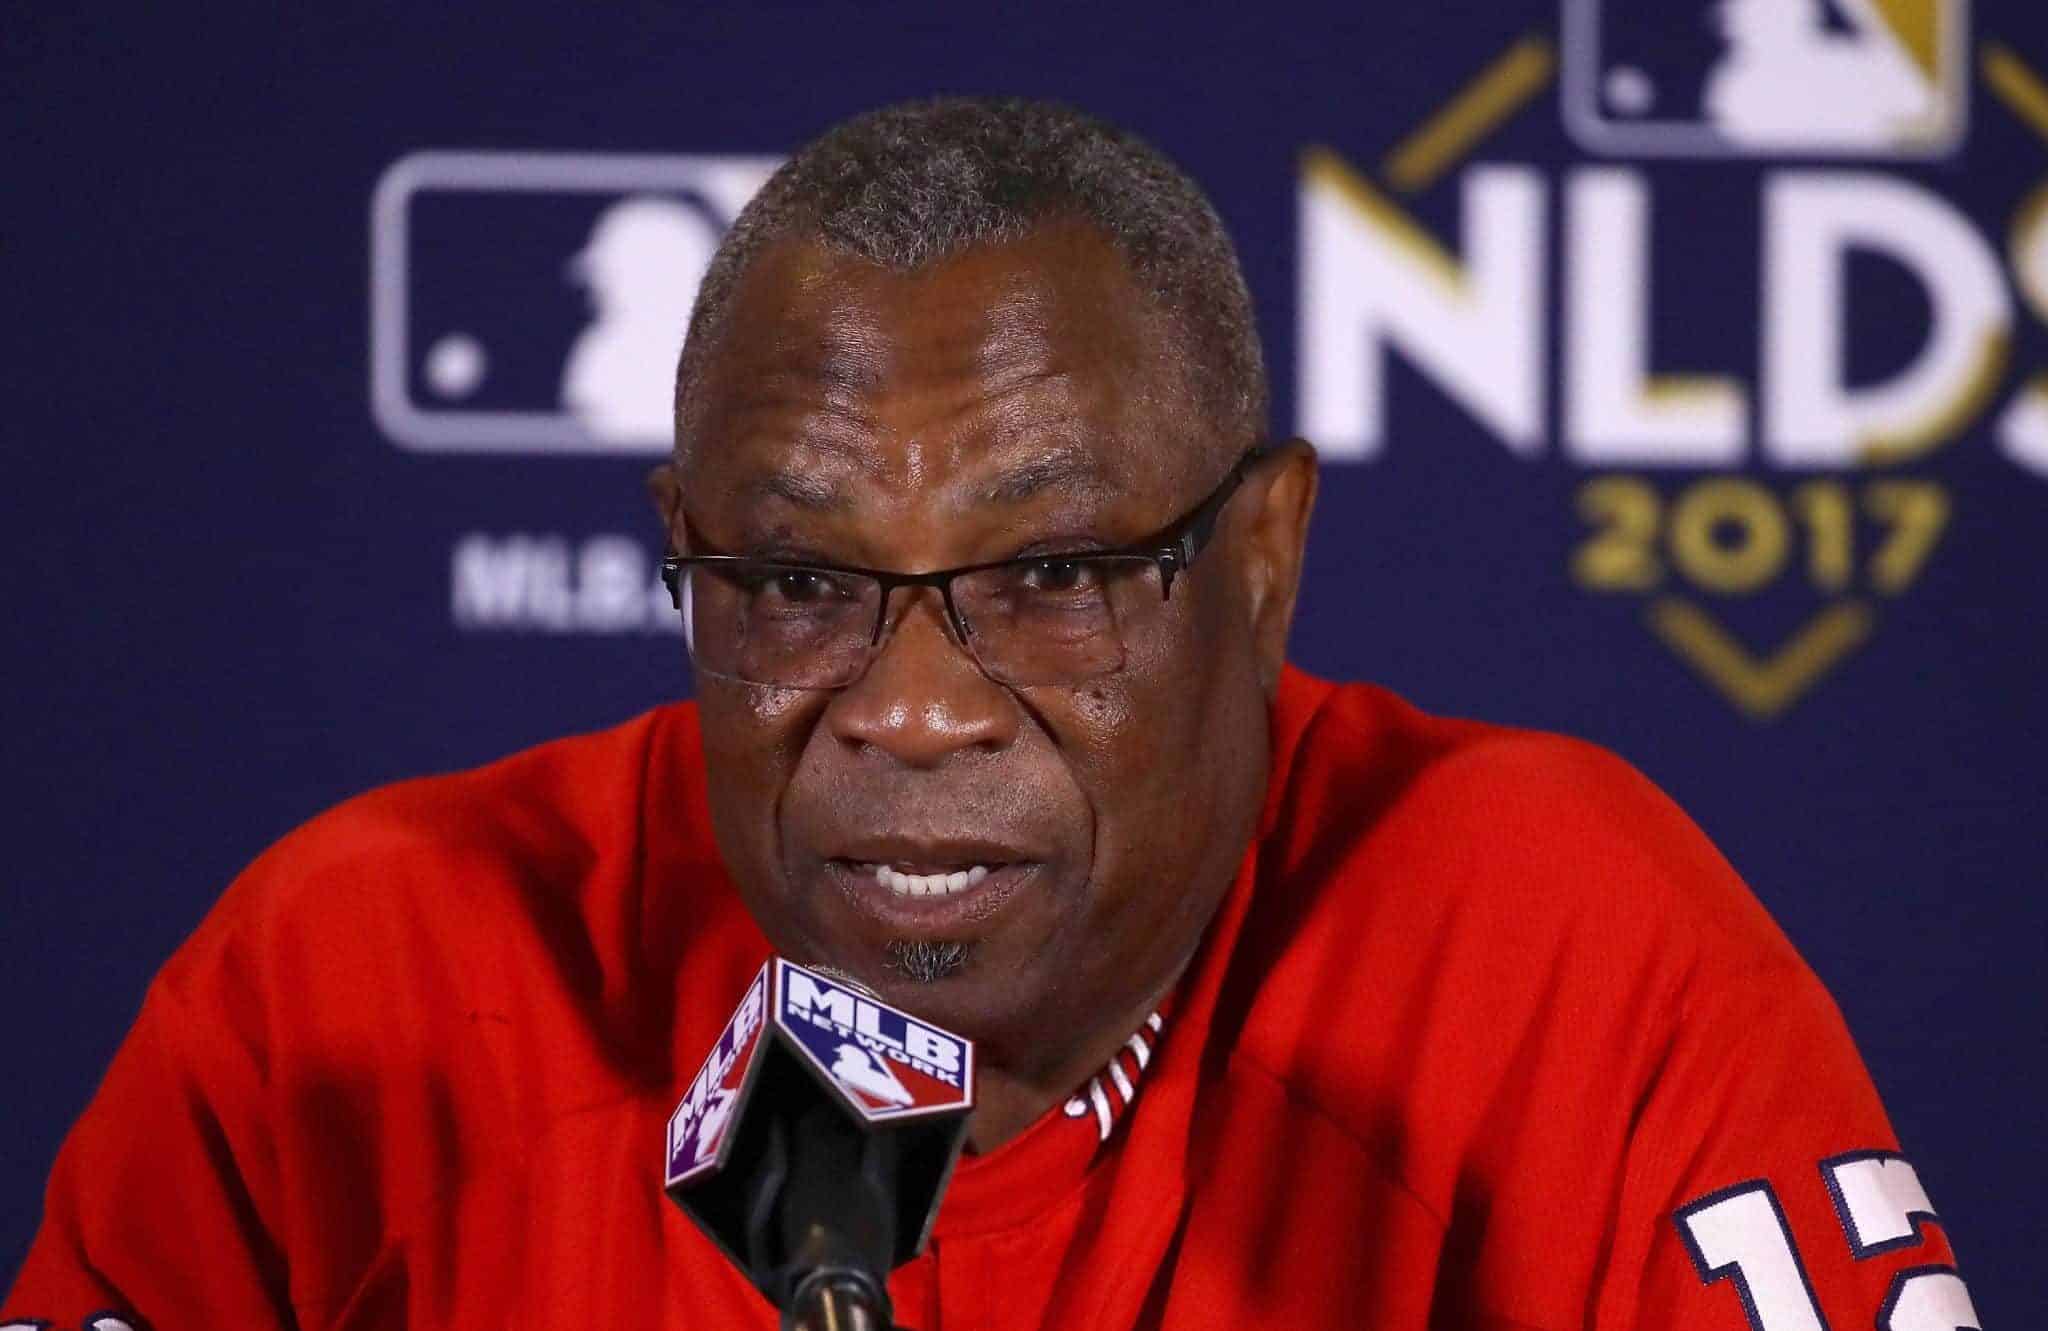 CHICAGO, IL - OCTOBER 11: Manager Dusty Baker of the Washington Nationals speaks to the media before game four of the National League Division Series against the Chicago Cubs at Wrigley Field on October 11, 2017 in Chicago, Illinois.